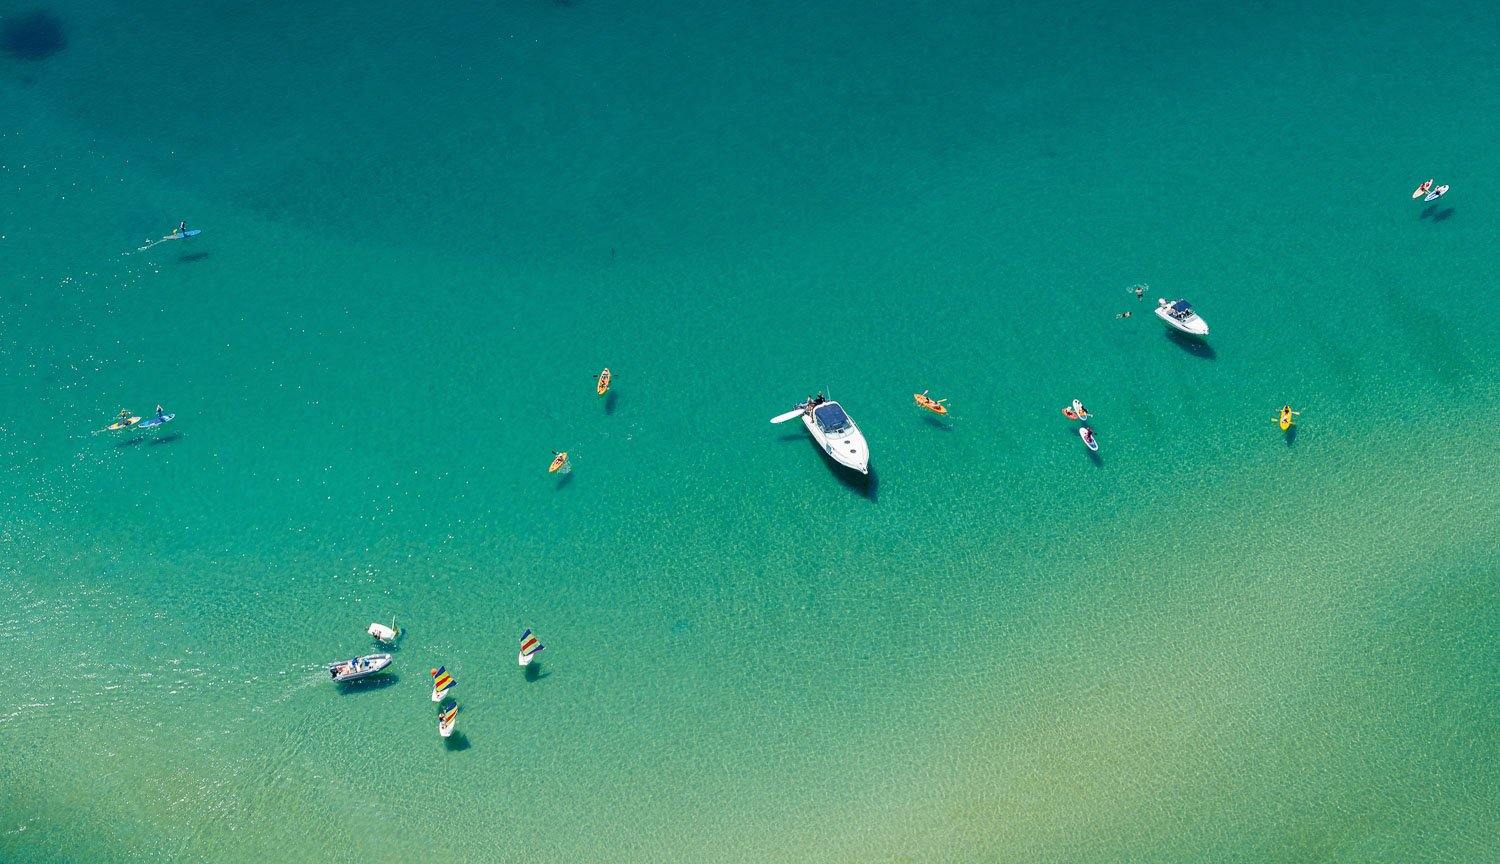 Aerial view of the green ocean with some boats floating over, Turquoise Shadows - Mornington Peninsula VIC